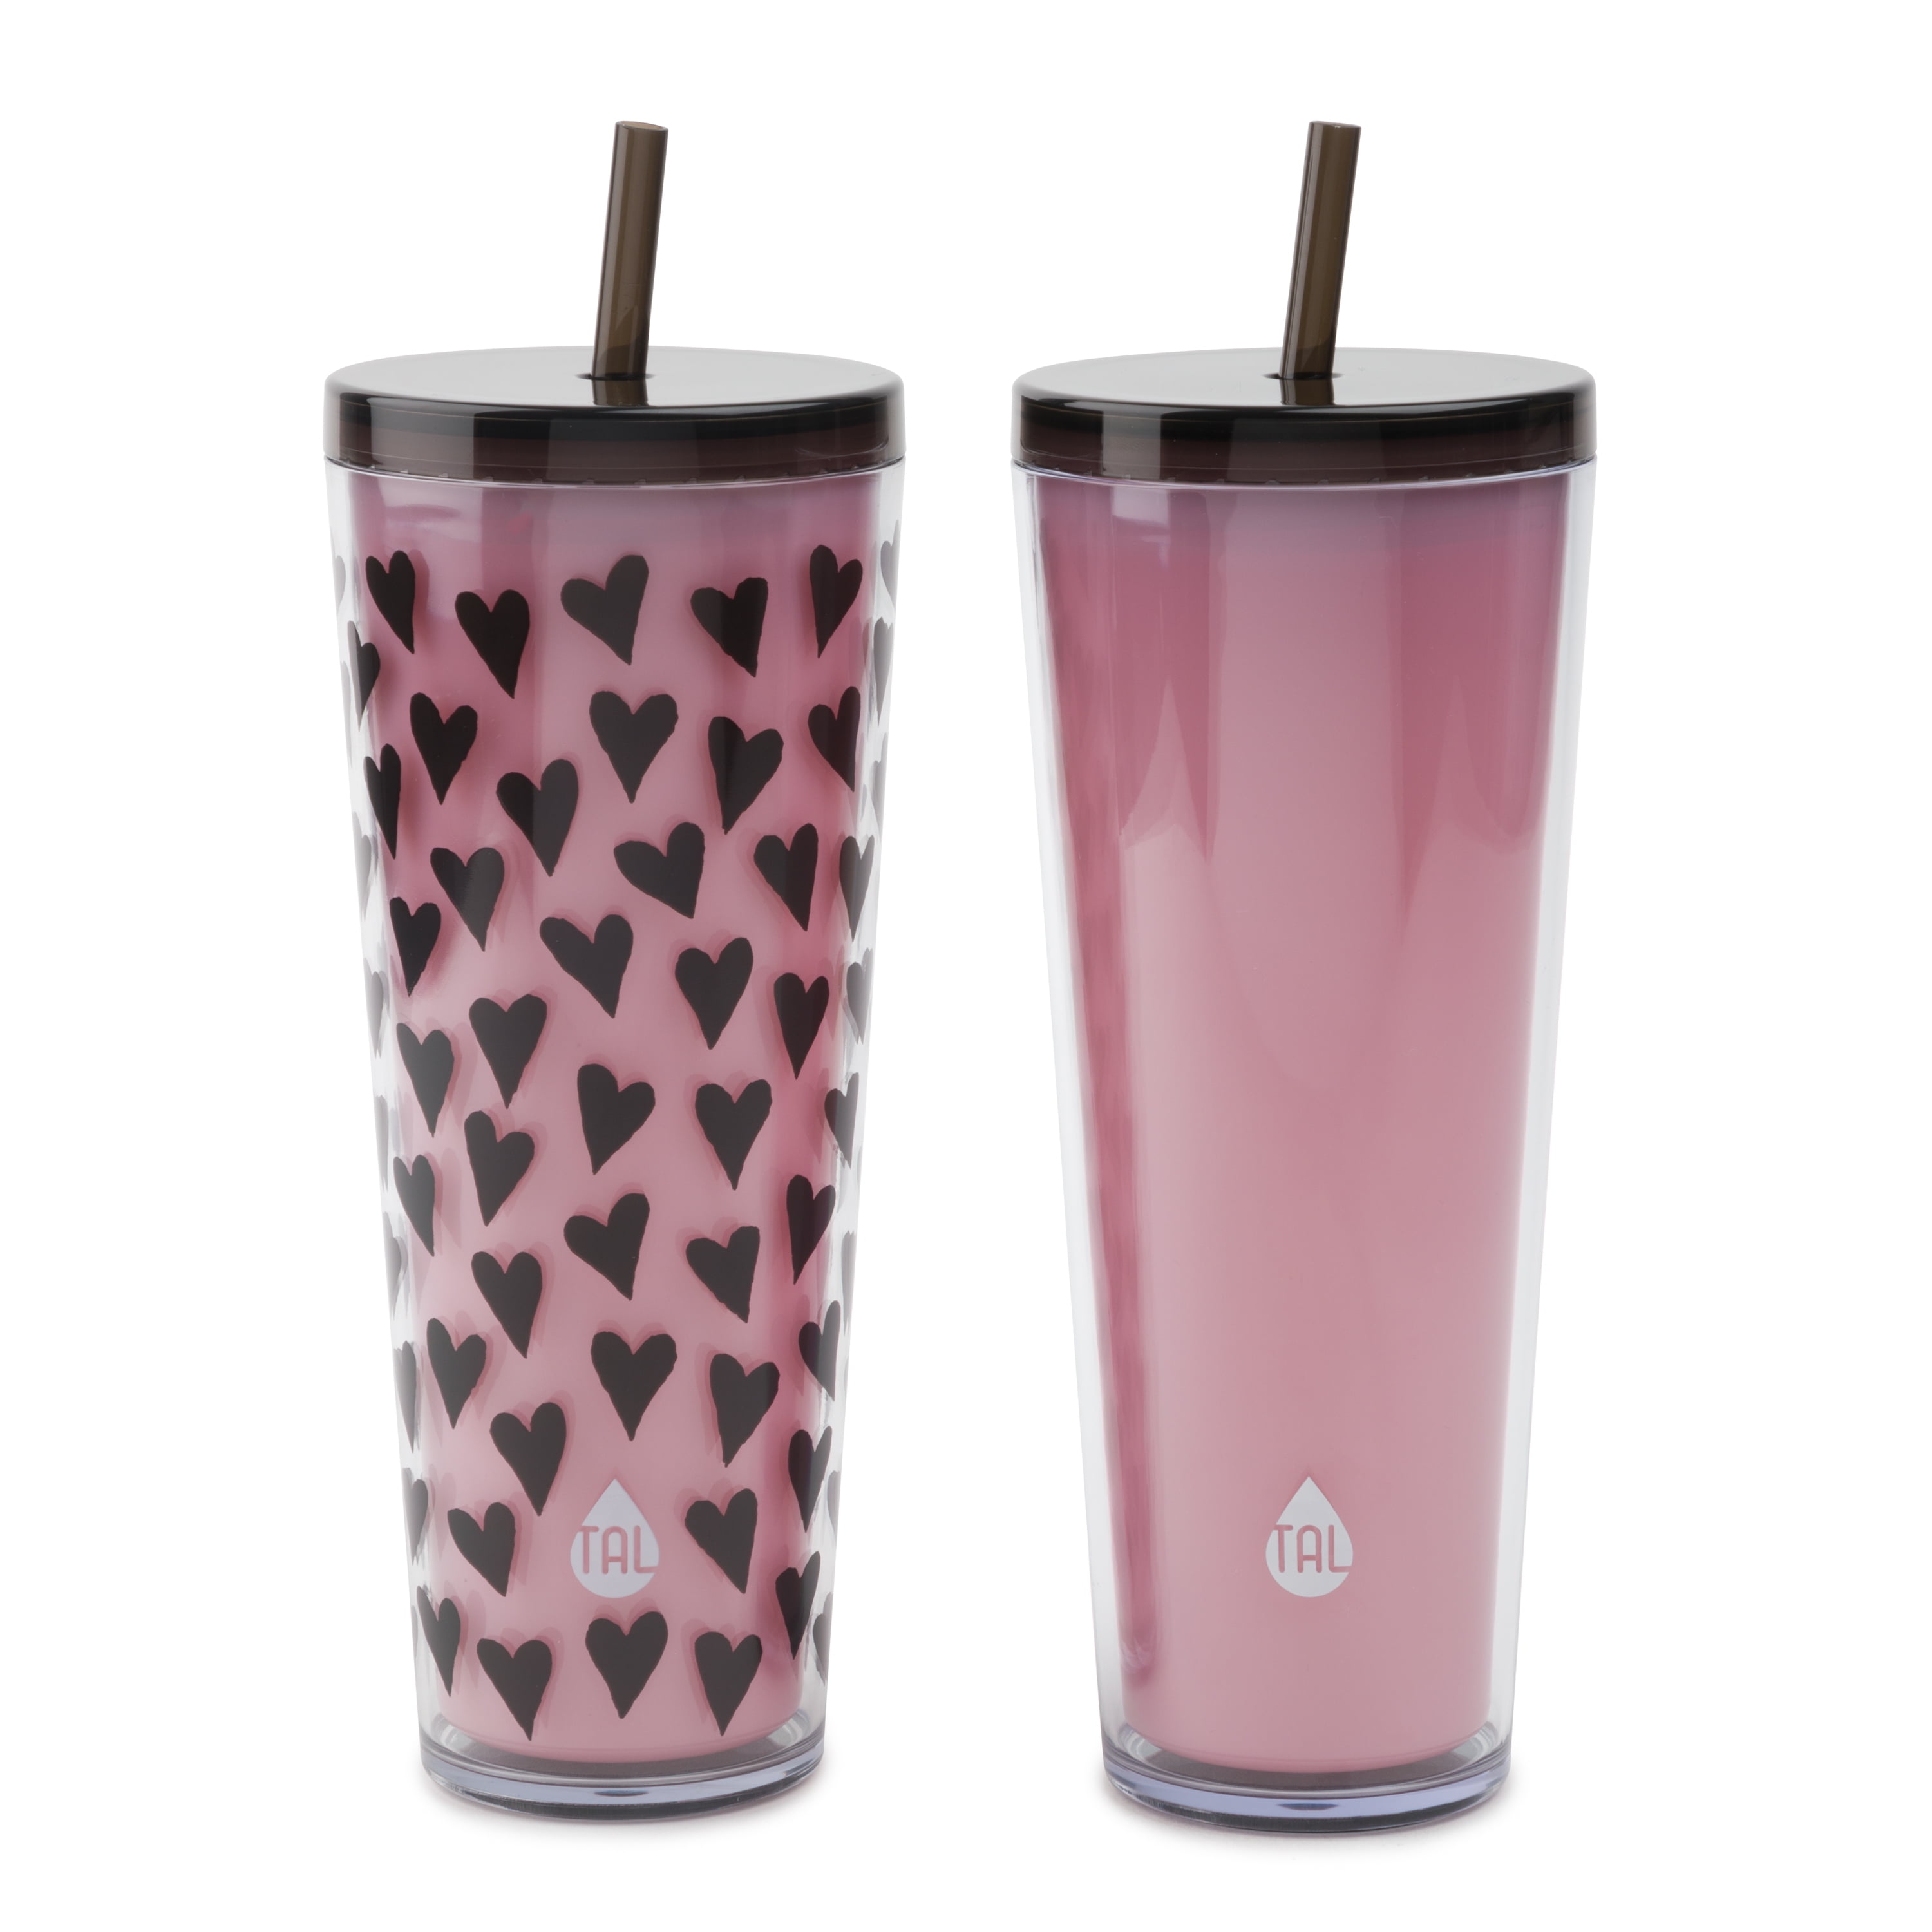 NEW! Monogrammed Valentine Tumbler! 19 oz., BPA Free, double walled. $14  Find me on Facebook, Petal Pushers, Greenville, SC